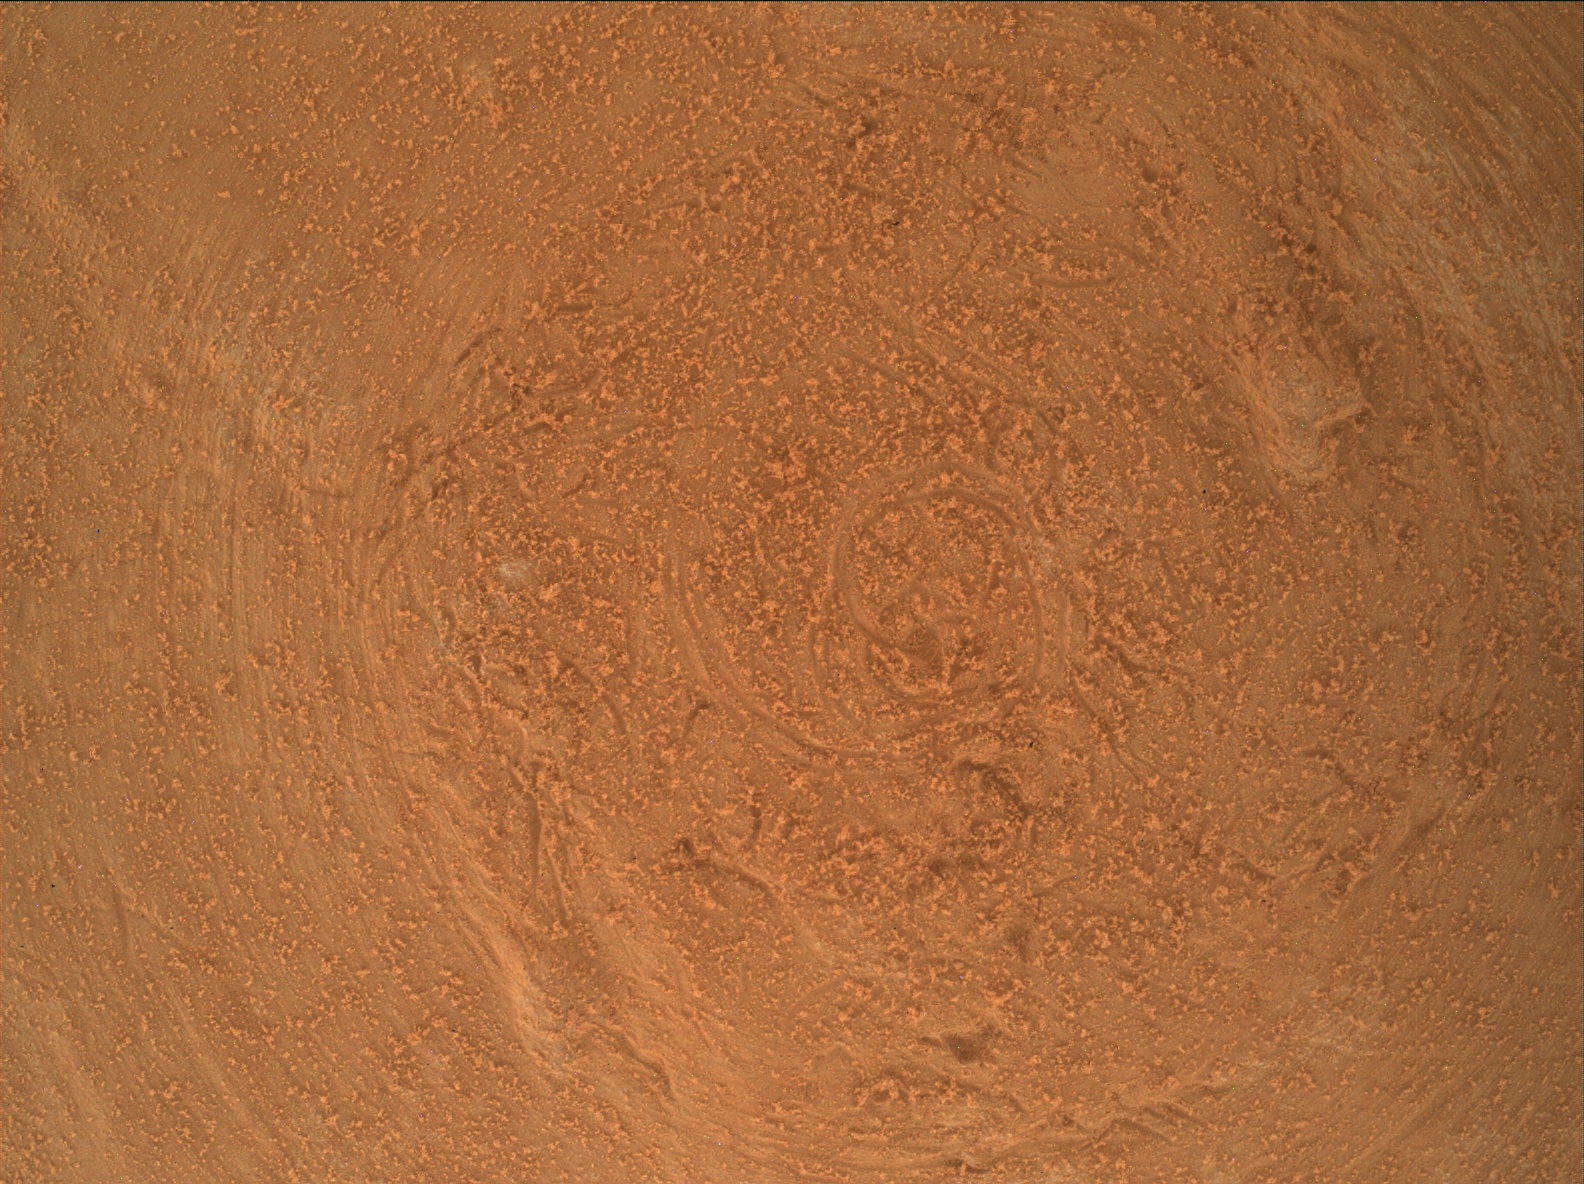 Nasa's Mars rover Curiosity acquired this image using its Mars Hand Lens Imager (MAHLI) on Sol 3547